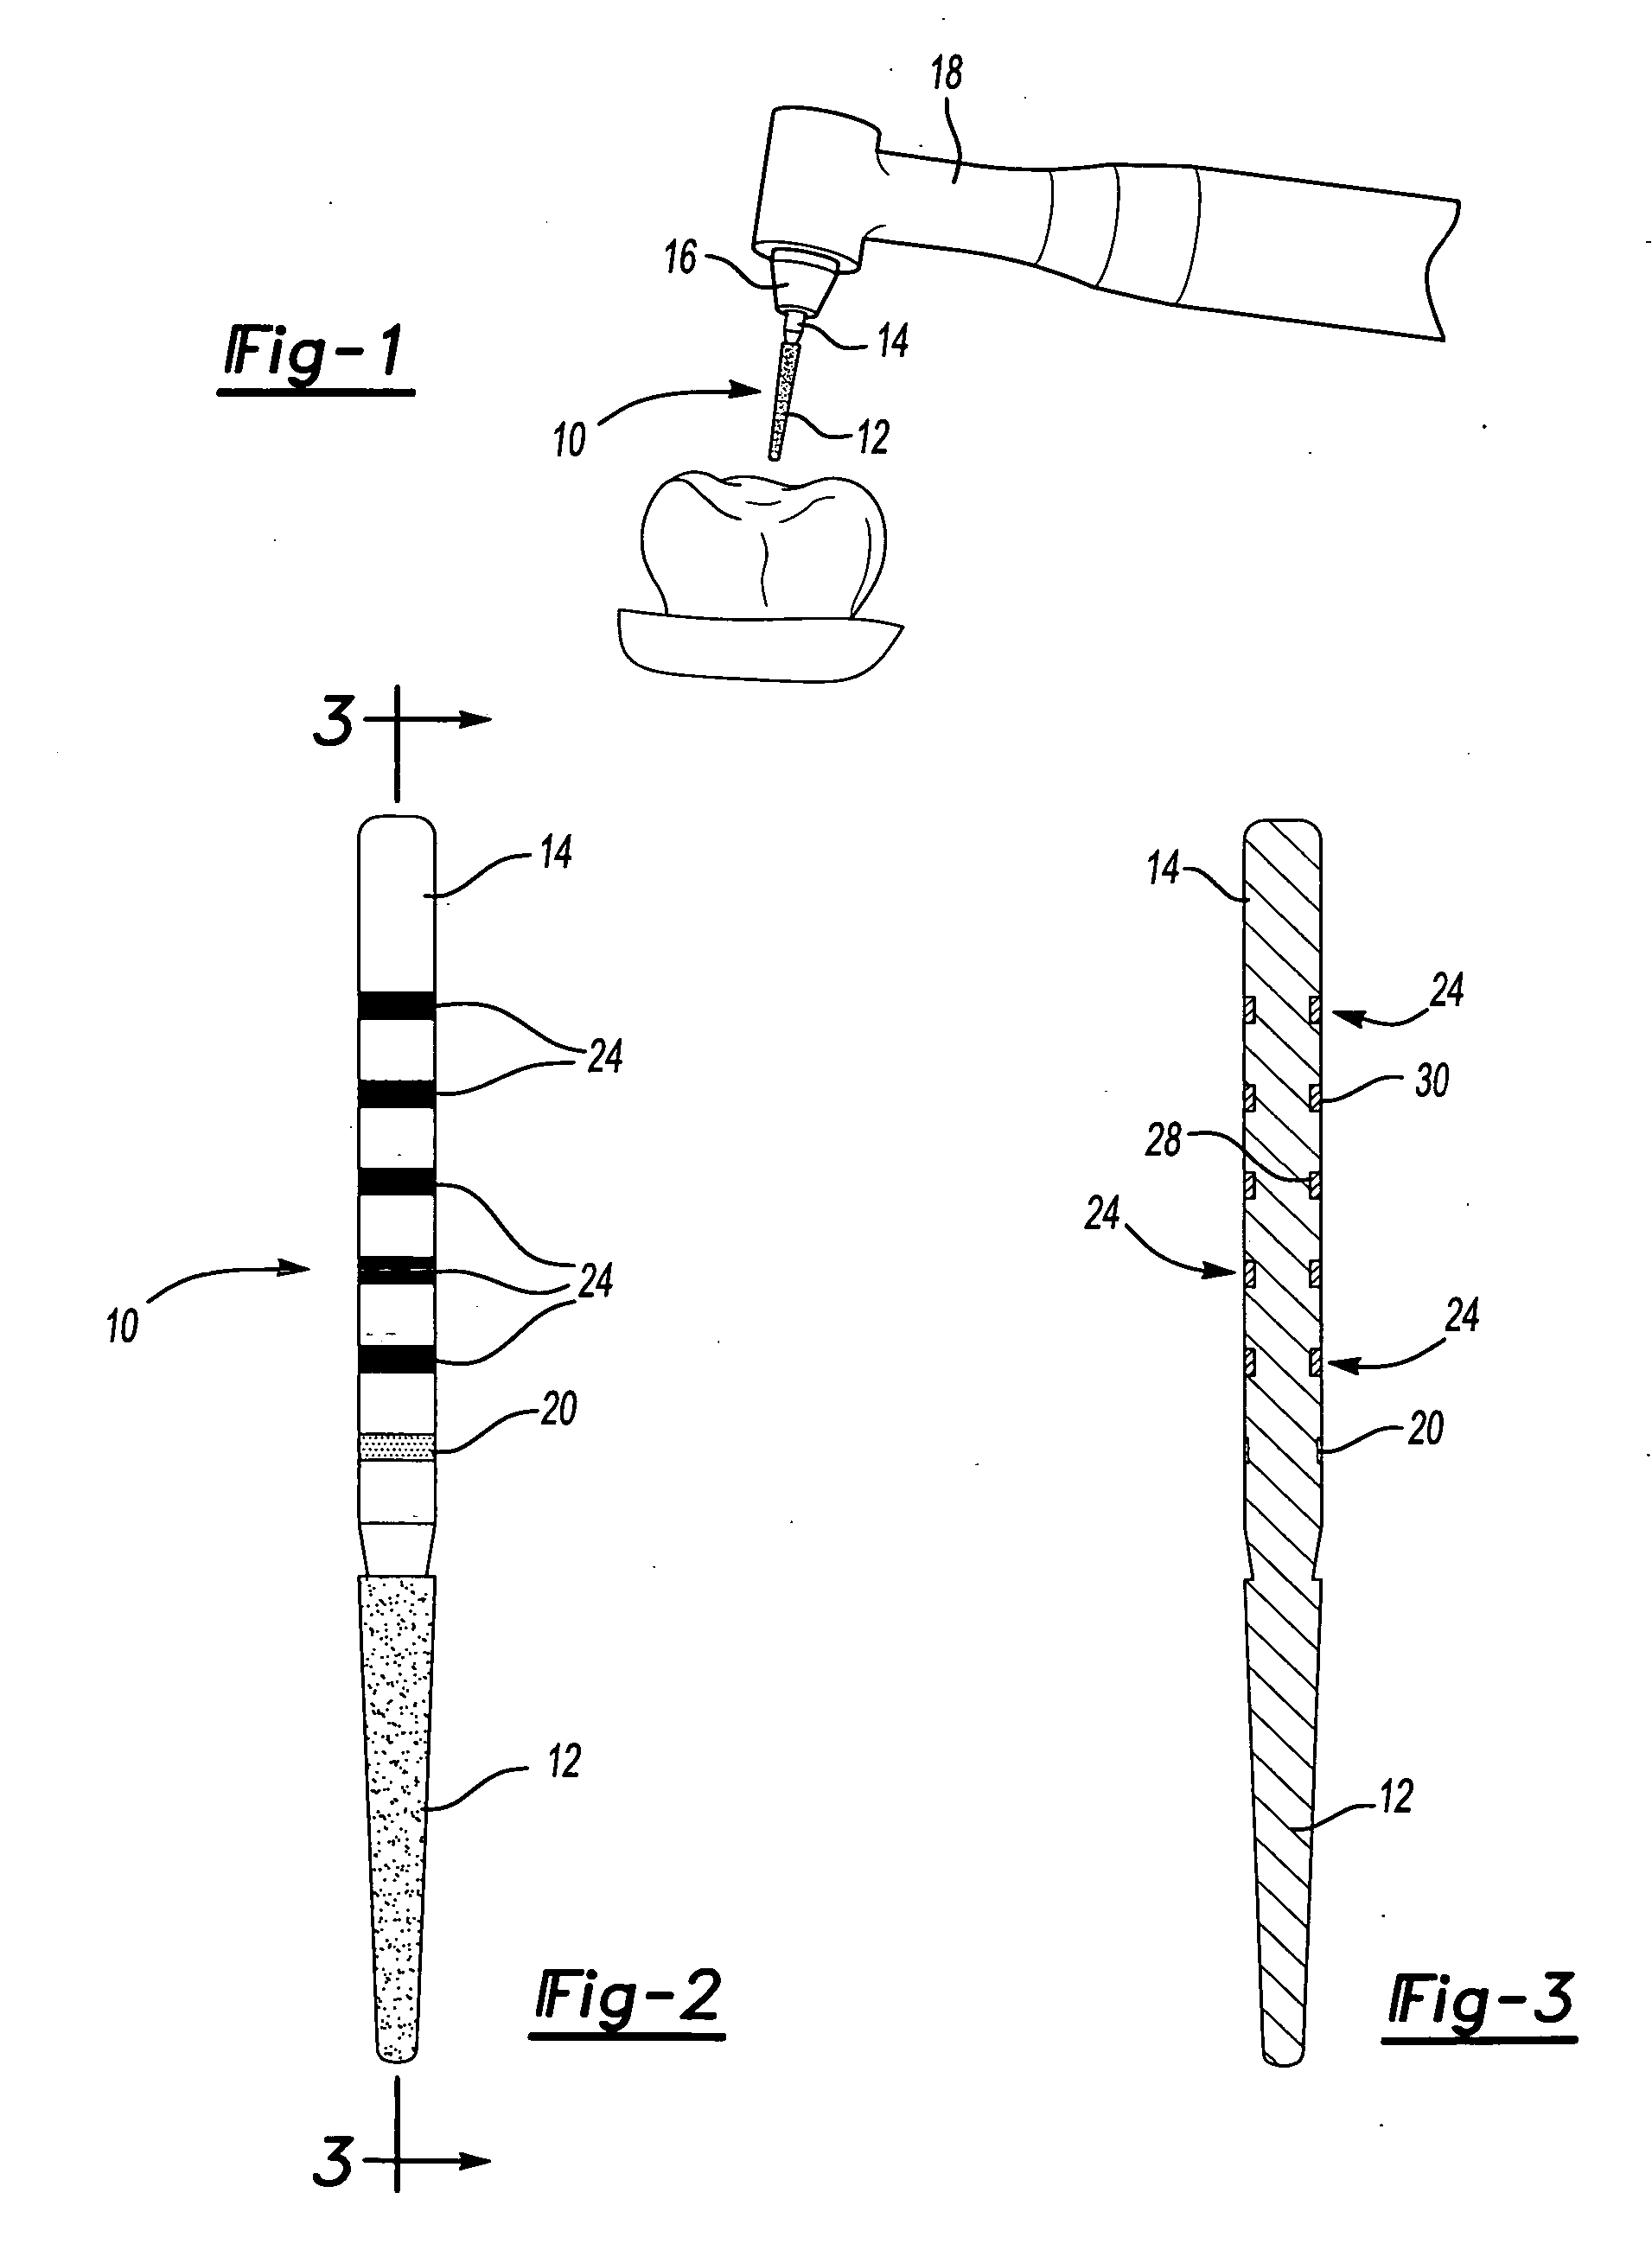 Dental bur with use history recording rings and method of recording the number of uses of a dental bur